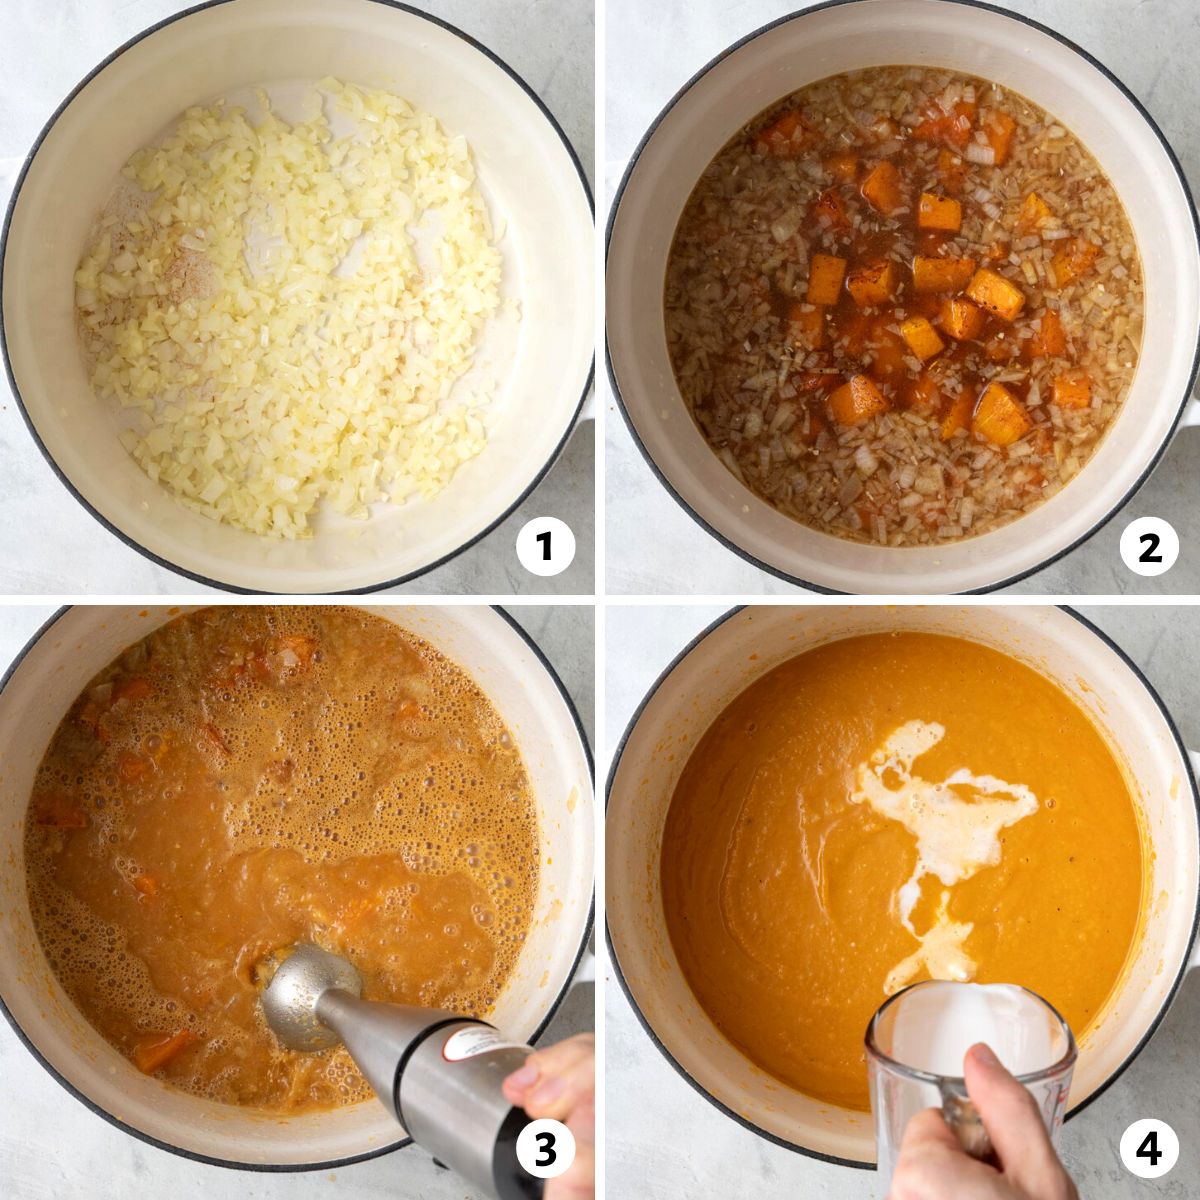 Collage of two images showing the pot of soup with the vegetable broth before and after blending